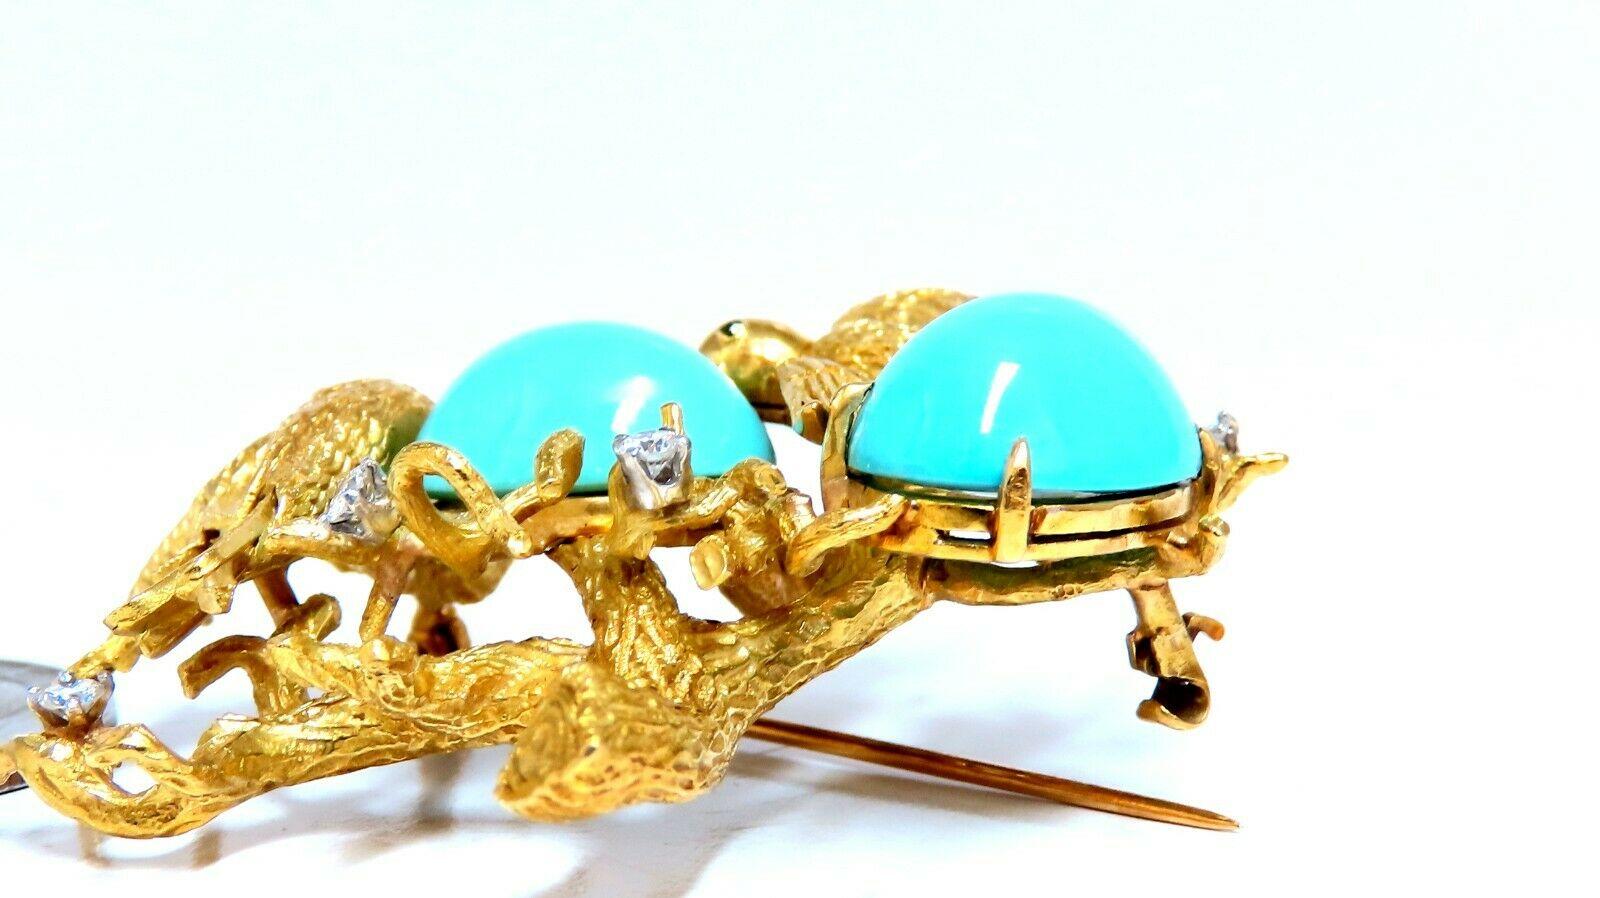 Vintage Bird Nest Eggs 20ct Turquoise 18kt Brooch High Intricate In New Condition For Sale In New York, NY